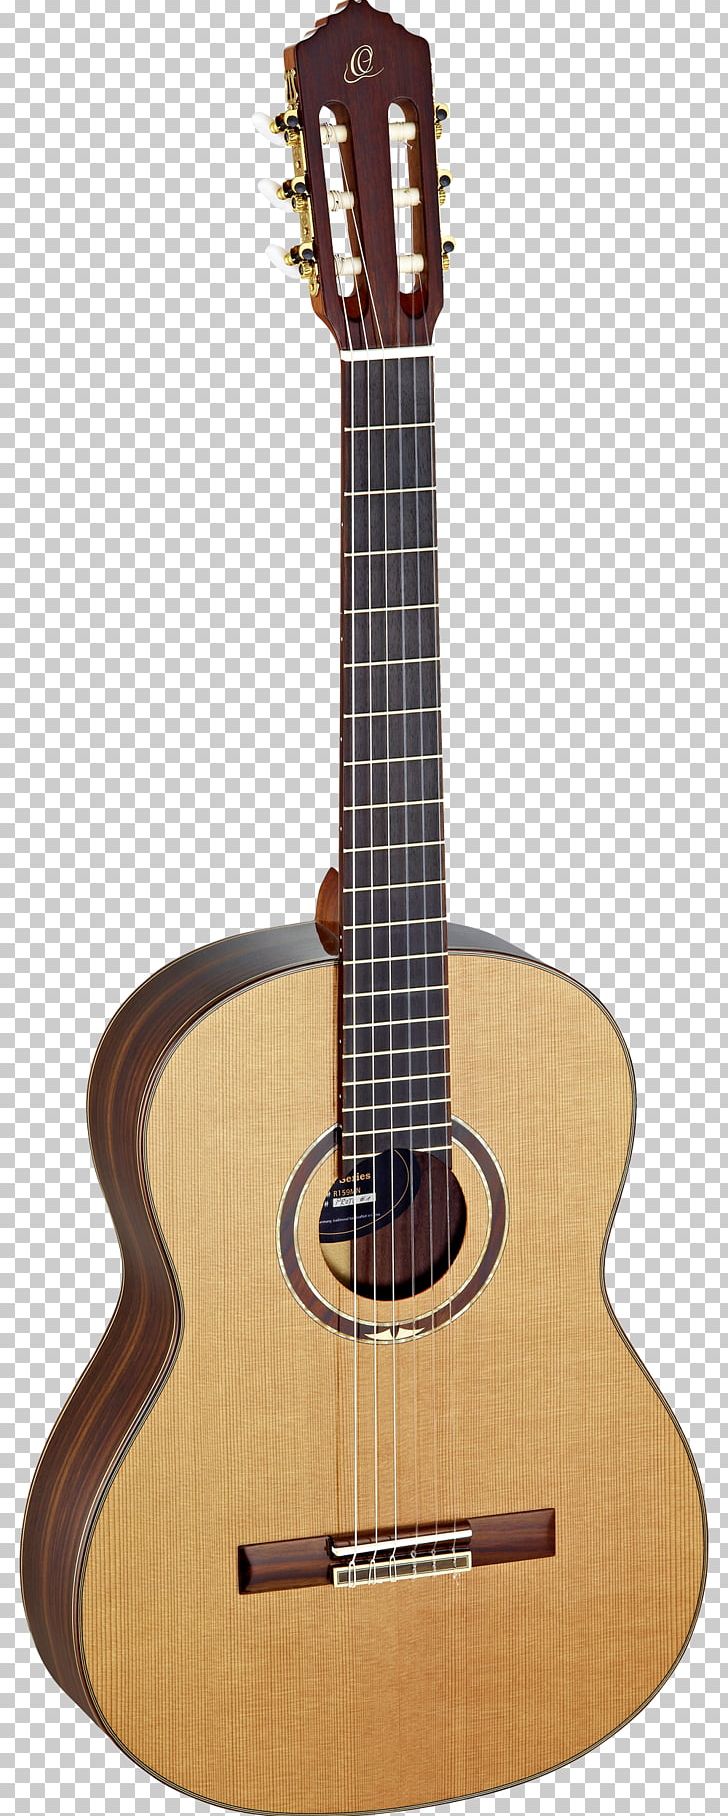 Ukulele Classical Guitar Steel-string Acoustic Guitar PNG, Clipart, Acoustic Electric Guitar, Amancio Ortega, Classical Guitar, Cuatro, Guitar Accessory Free PNG Download